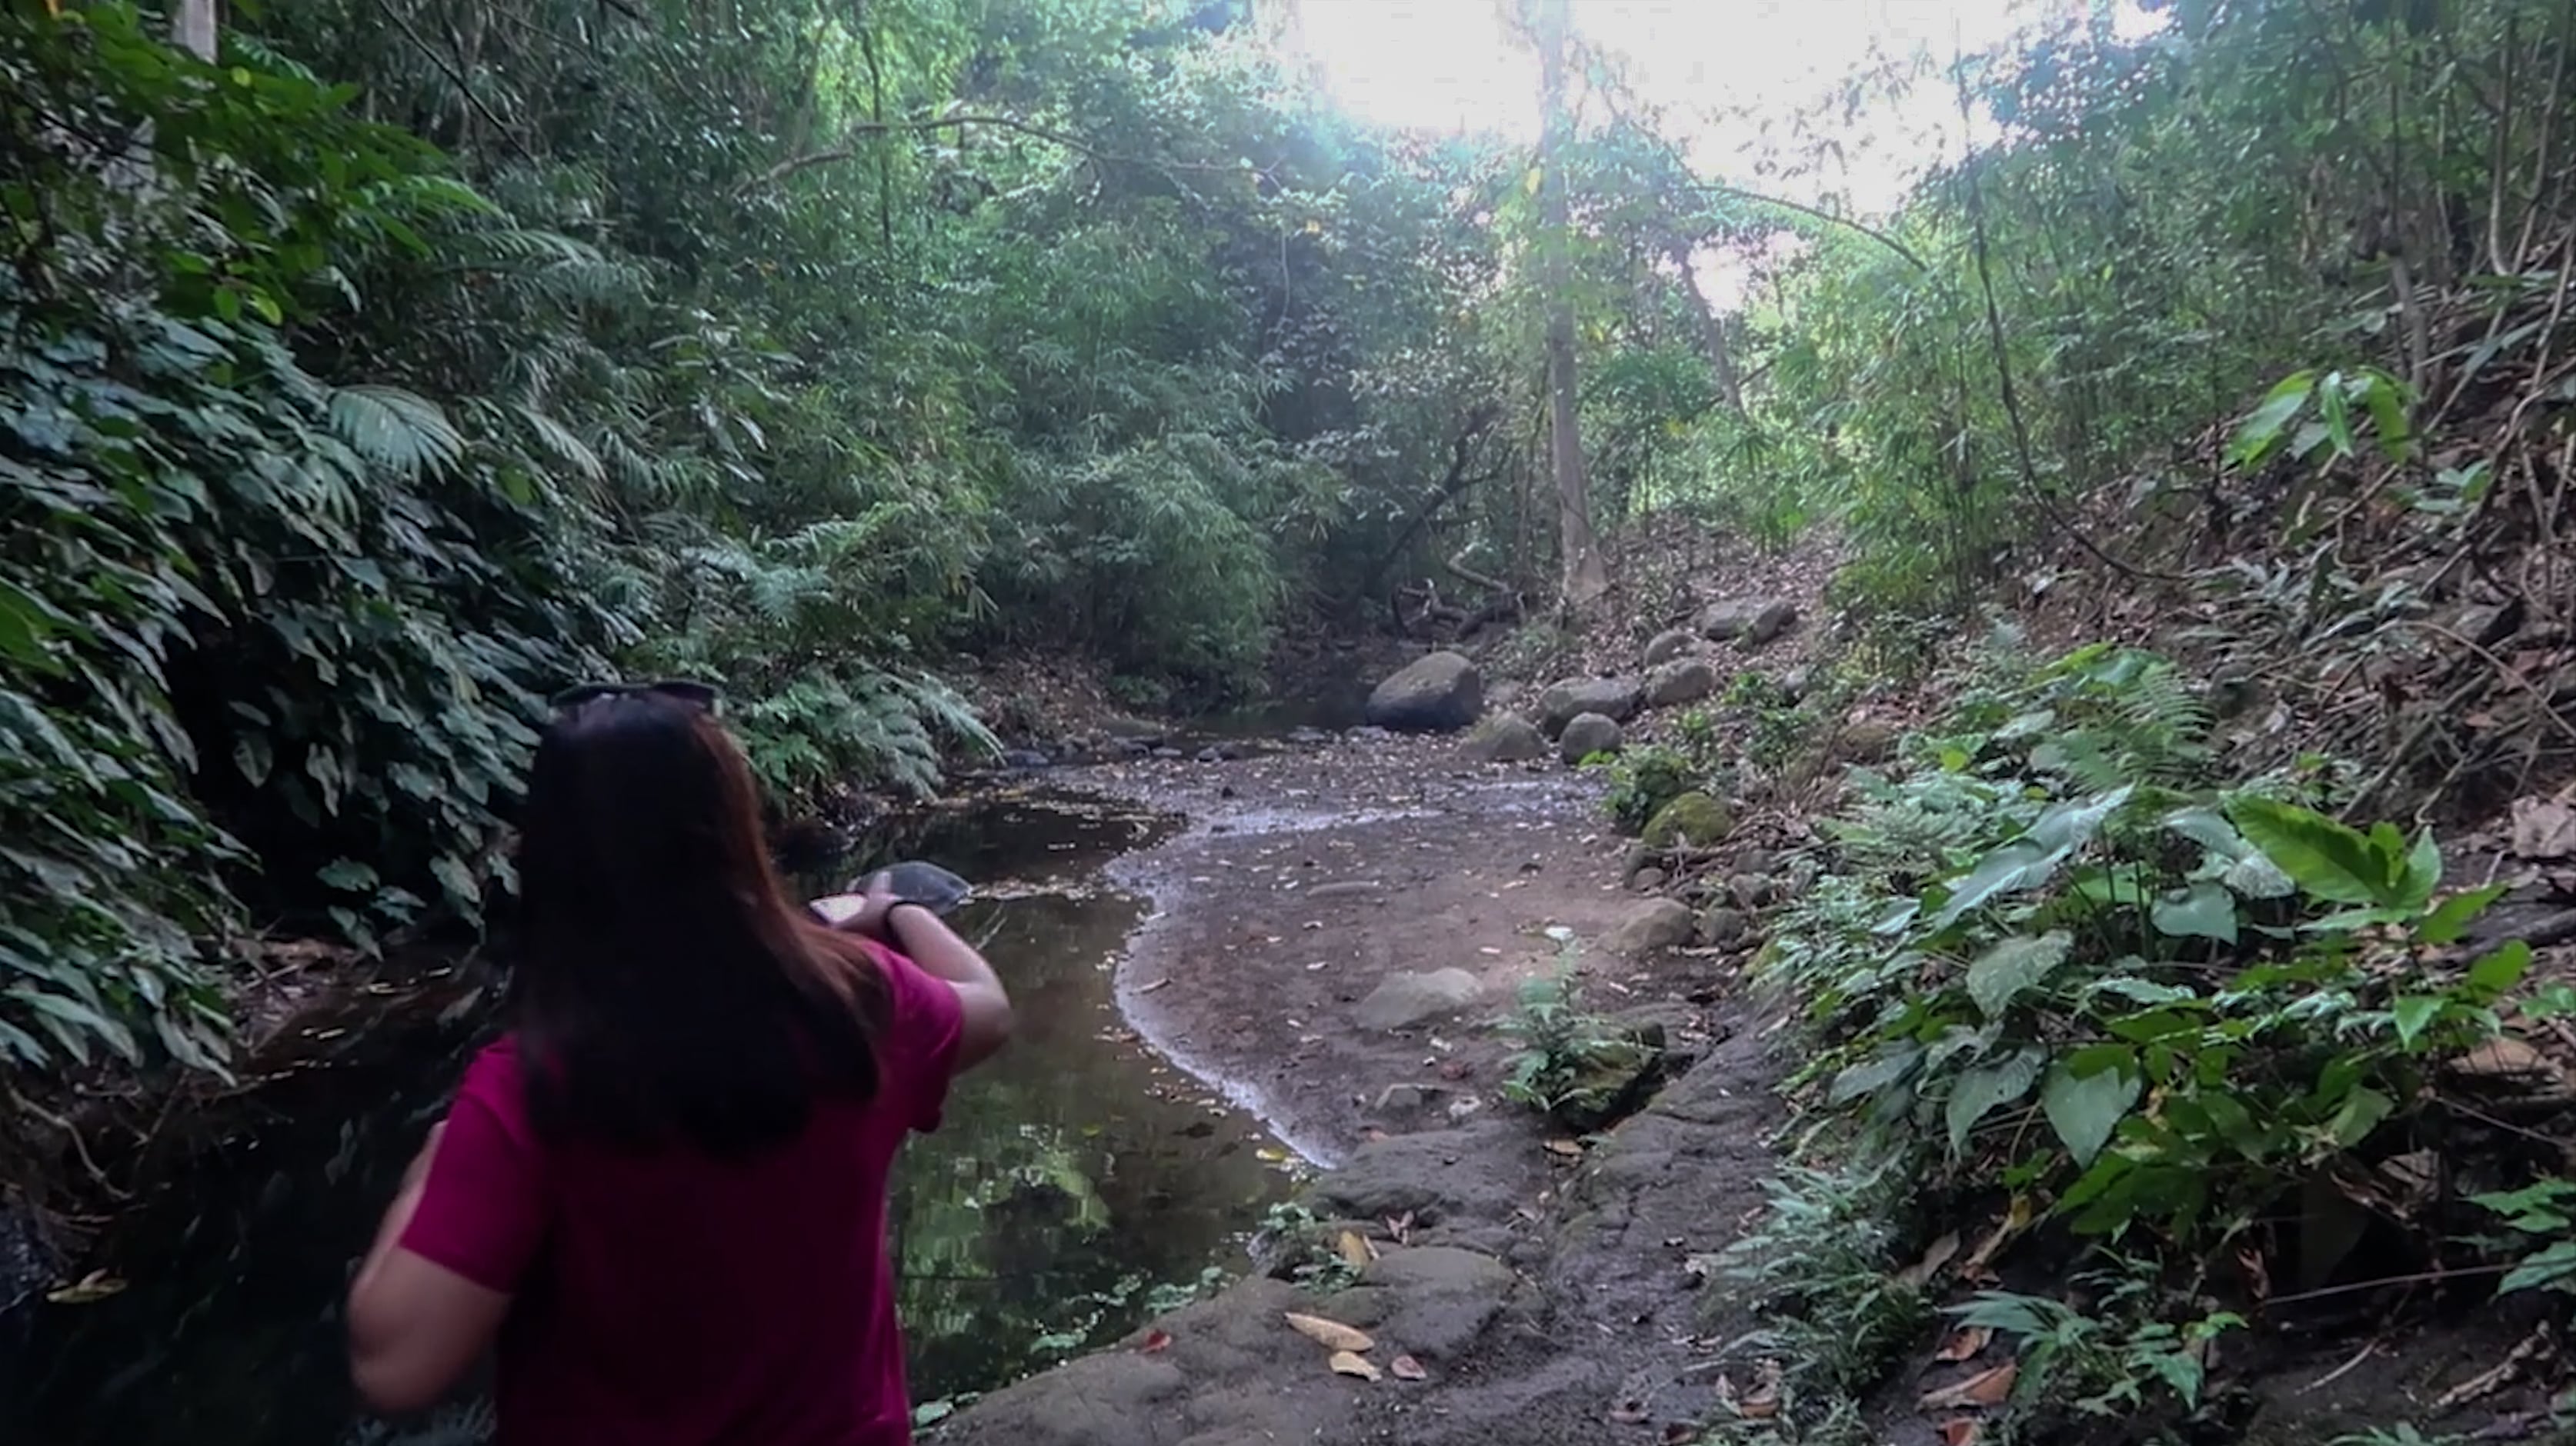 melody somido pointing in direction at picturesque forest in subic zambales philippines